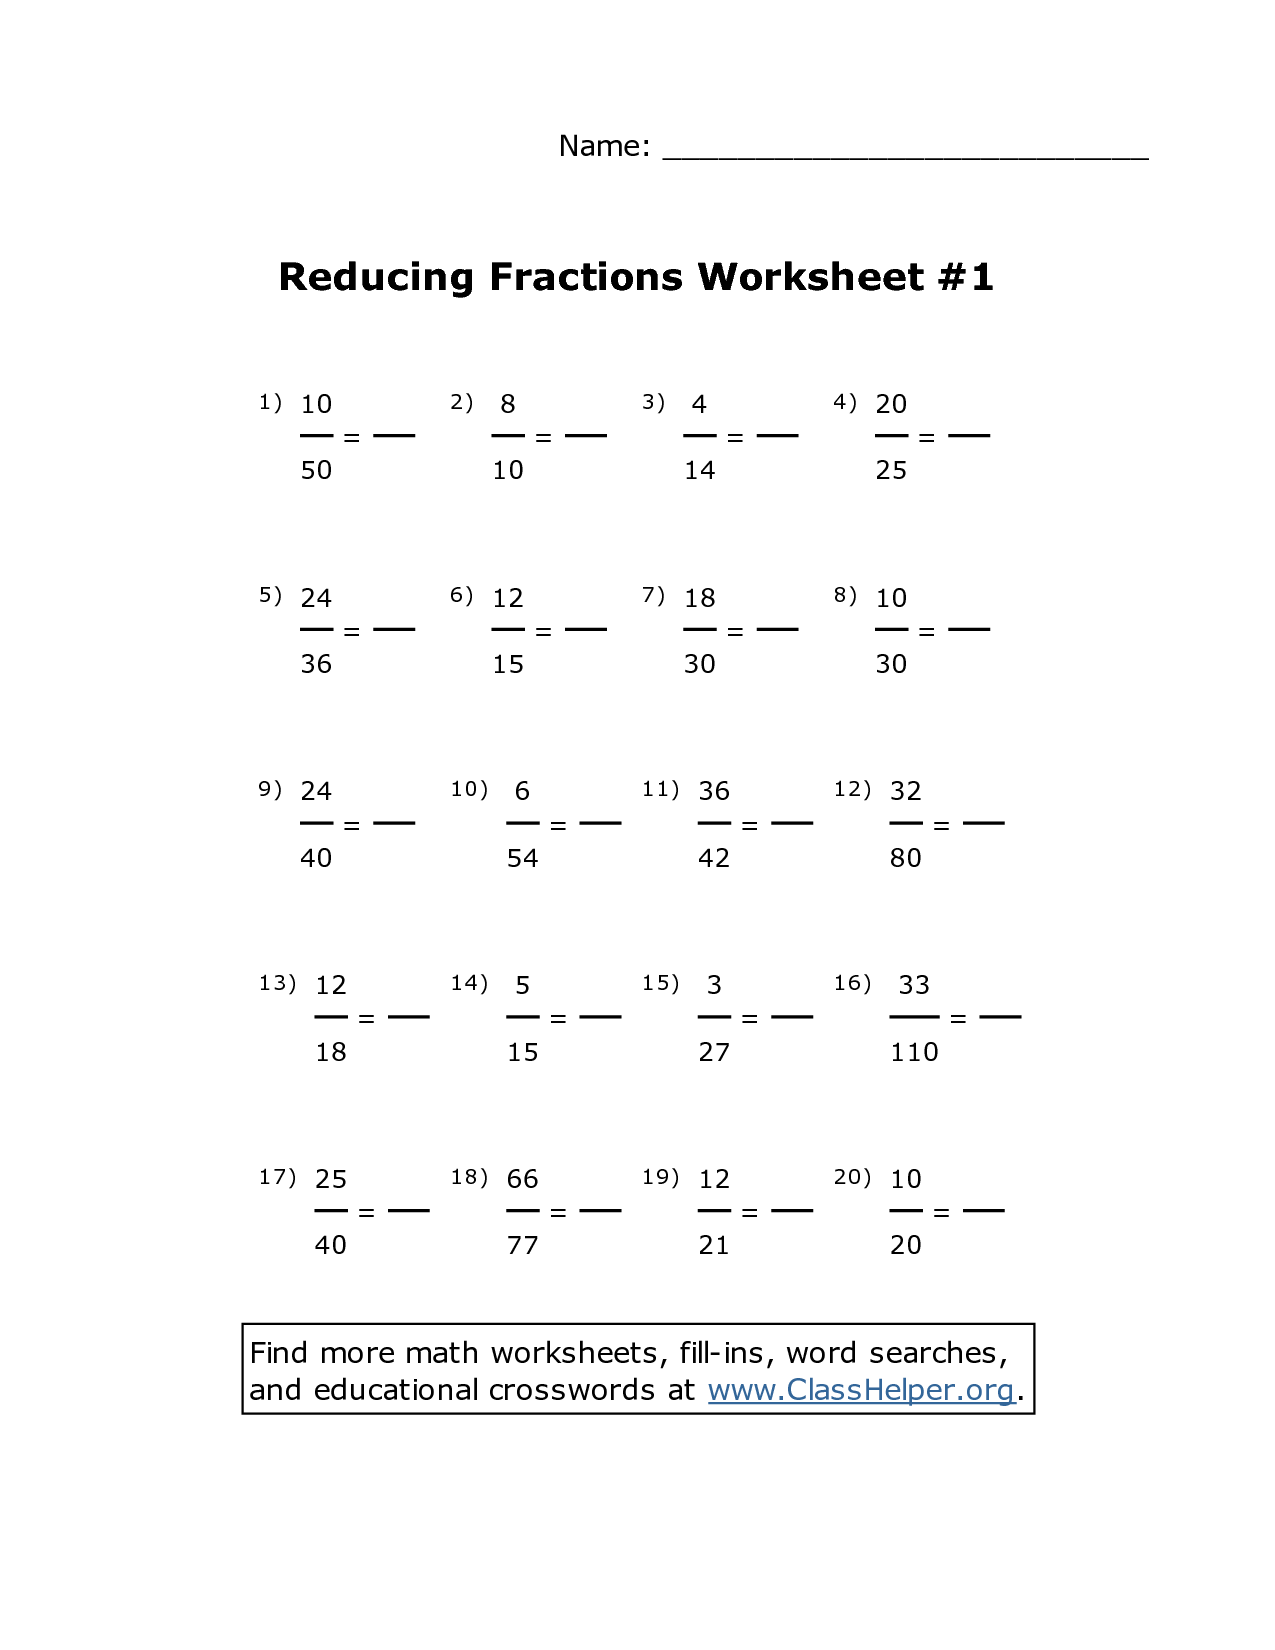 15 Best Images of Mixed Fractions Worksheets 6th Grade - Math Fraction